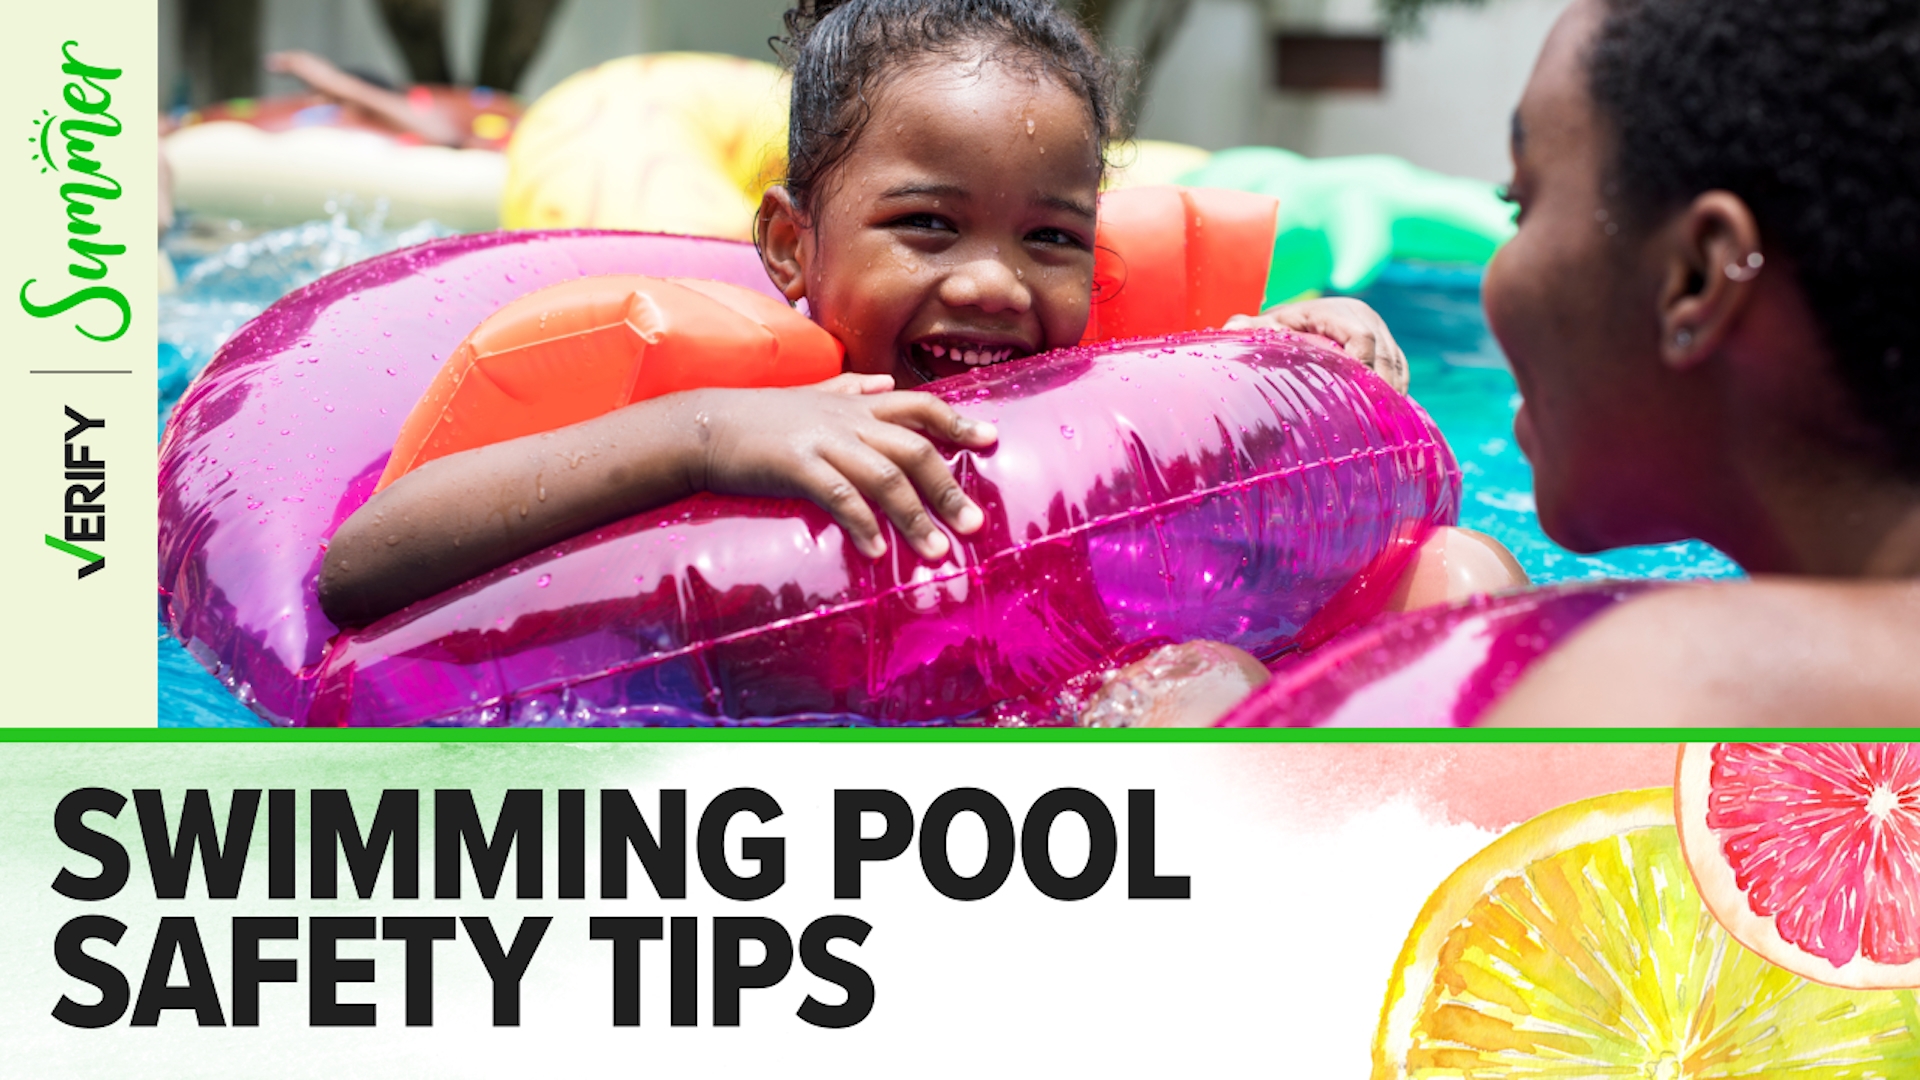 What causes red eyes after swimming? Can you swim right after eating? We VERIFY answers to common questions about how to stay safe in swimming pools this summer.